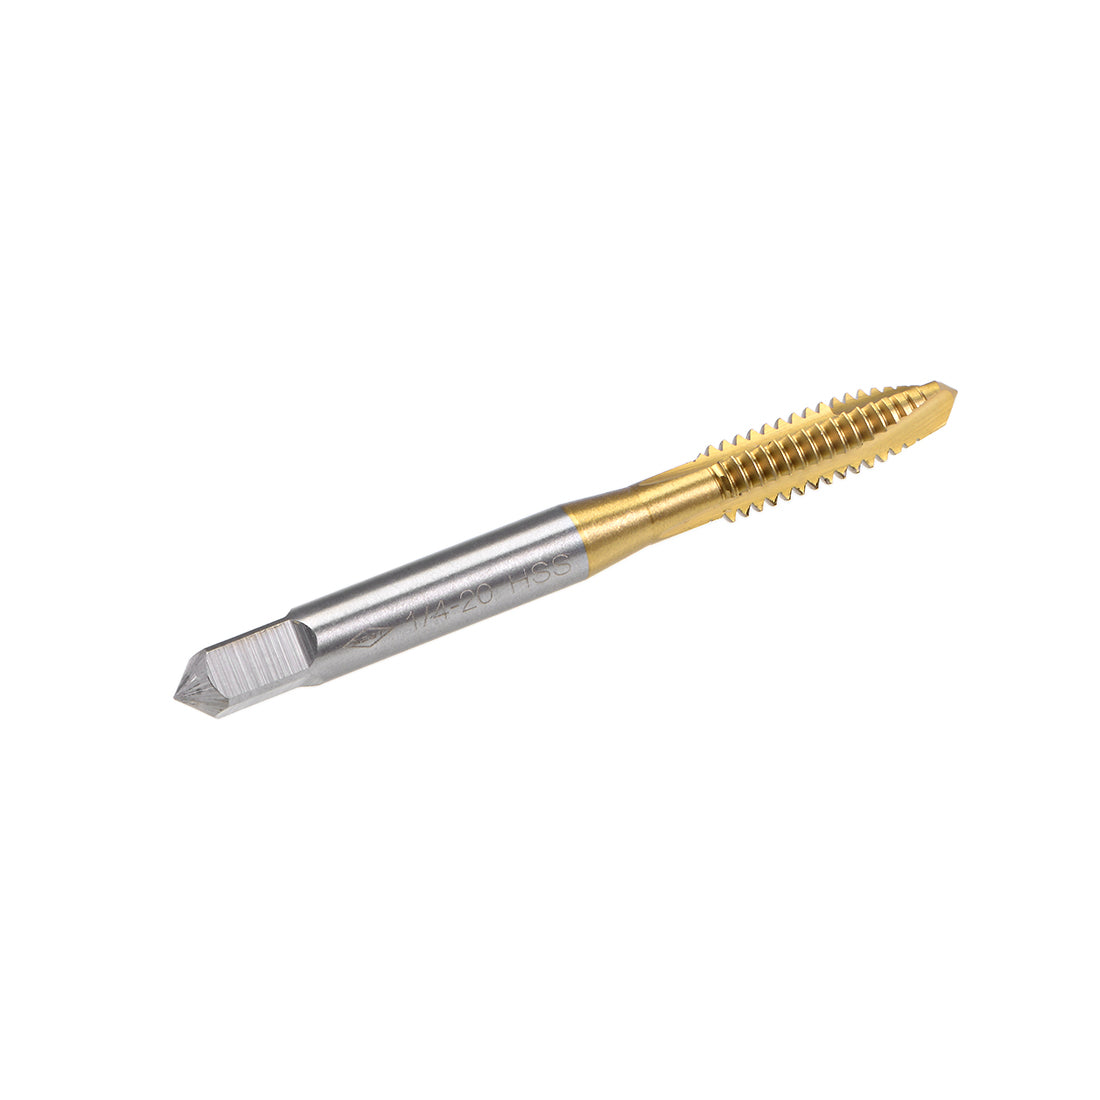 uxcell Uxcell Spiral Point Threading Tap 1/4-20 UNC Thread Pitch Titanium Coated HSS 2pcs